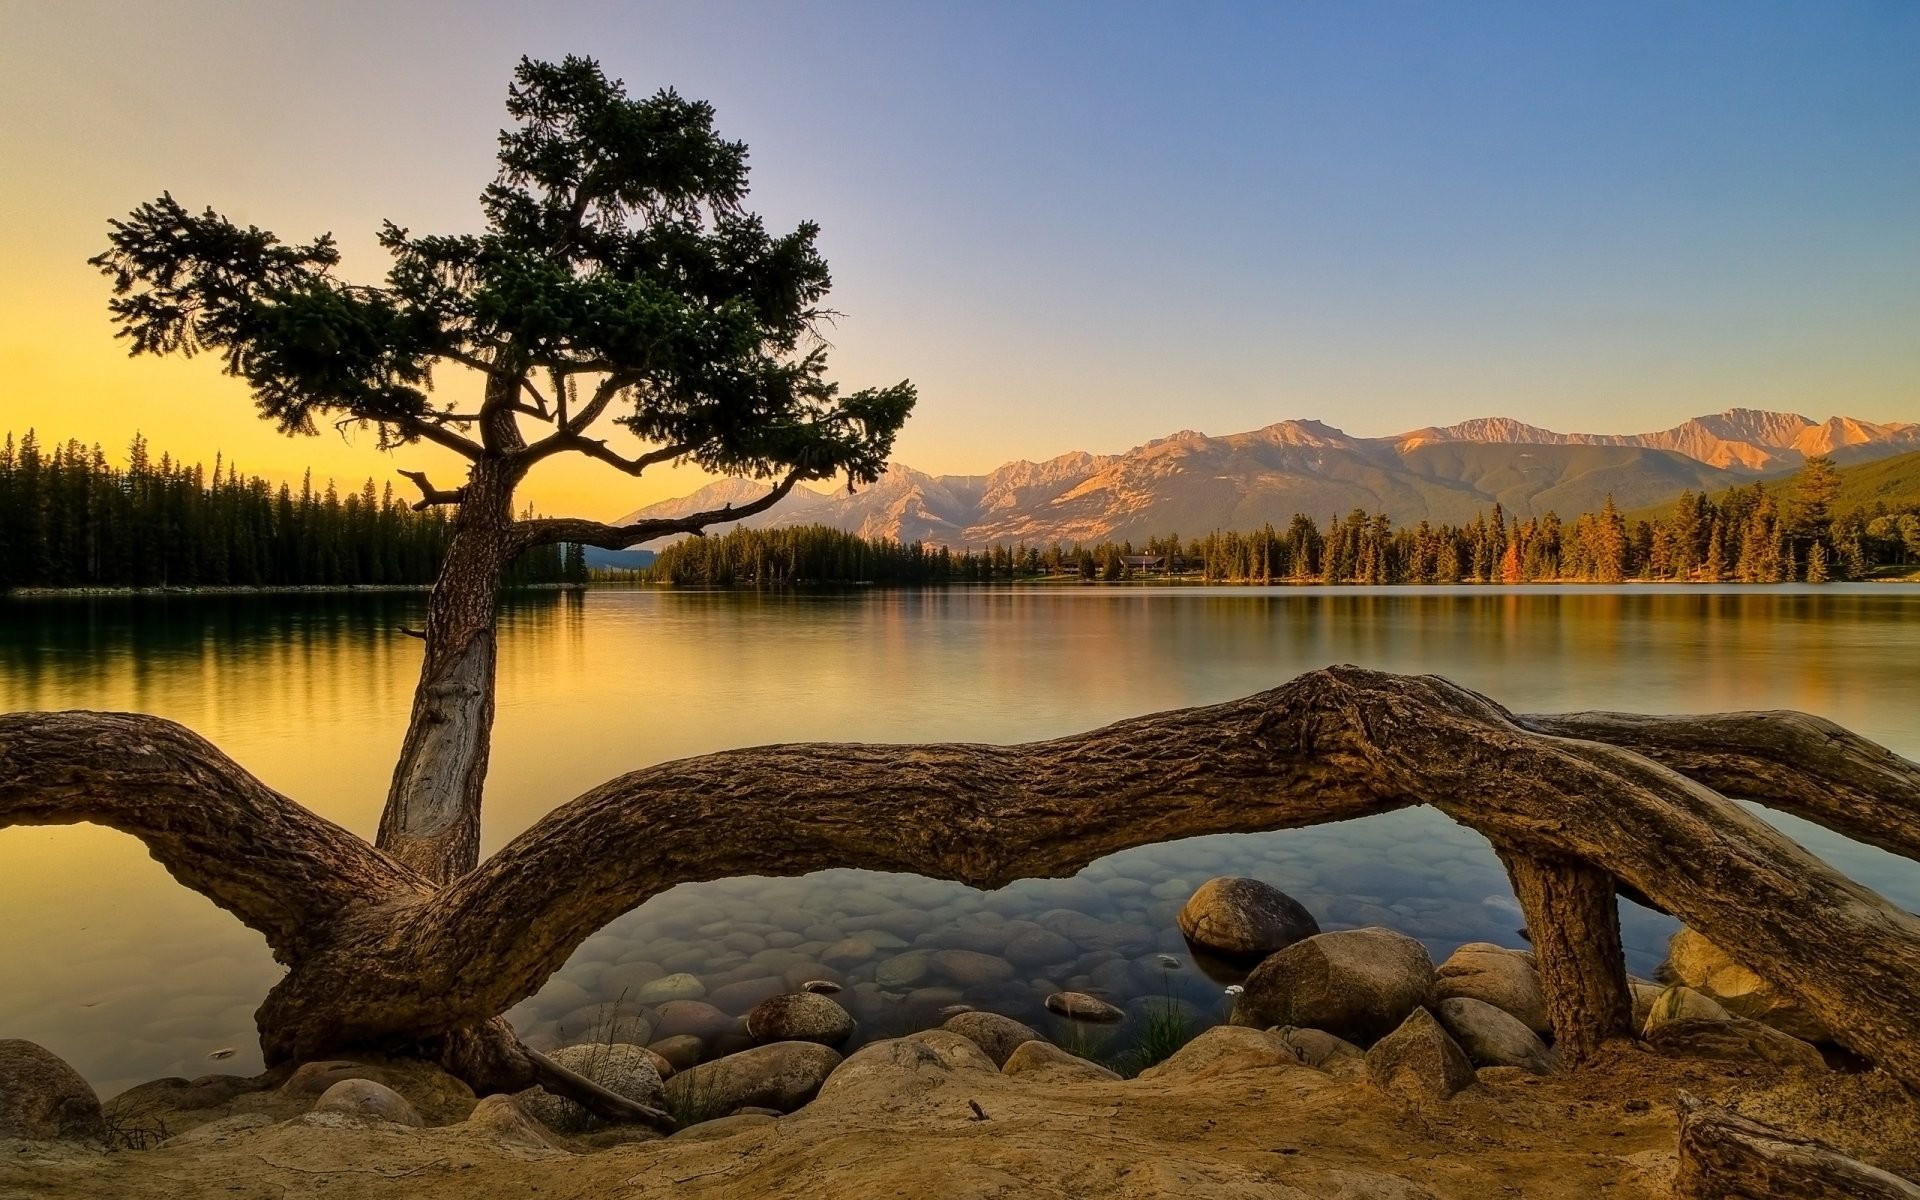 A tree with big roots grows on the shore of a lake at sunset